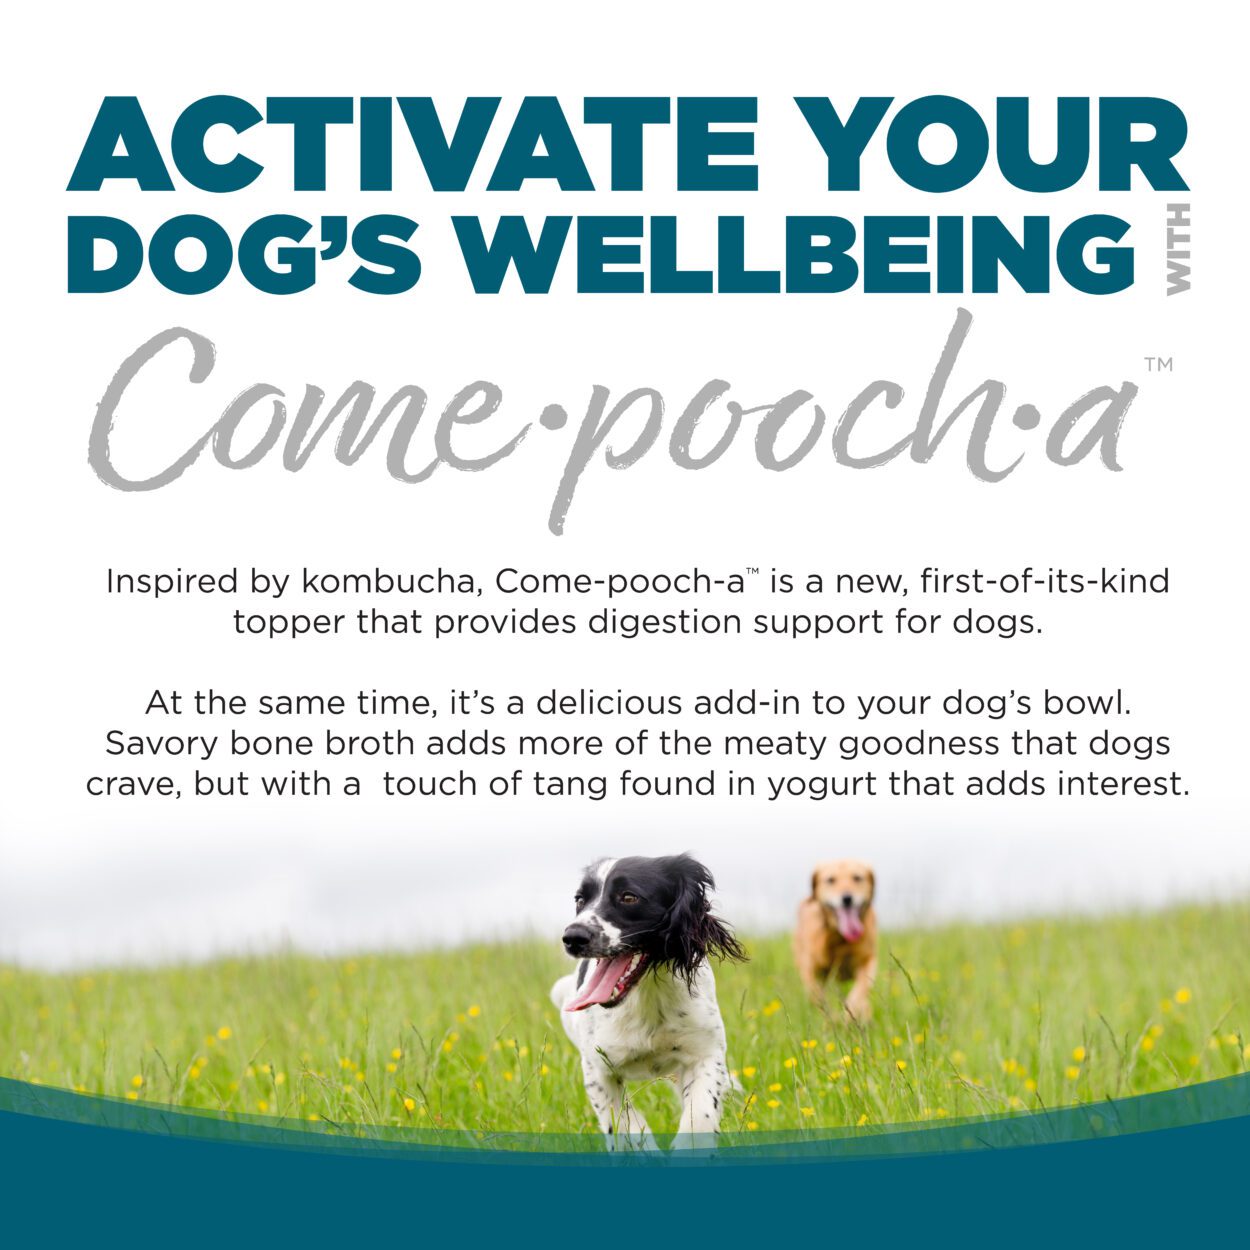 ACTIVATE YOUR DOG'S WELLBEING WITH COME-POOCH-A